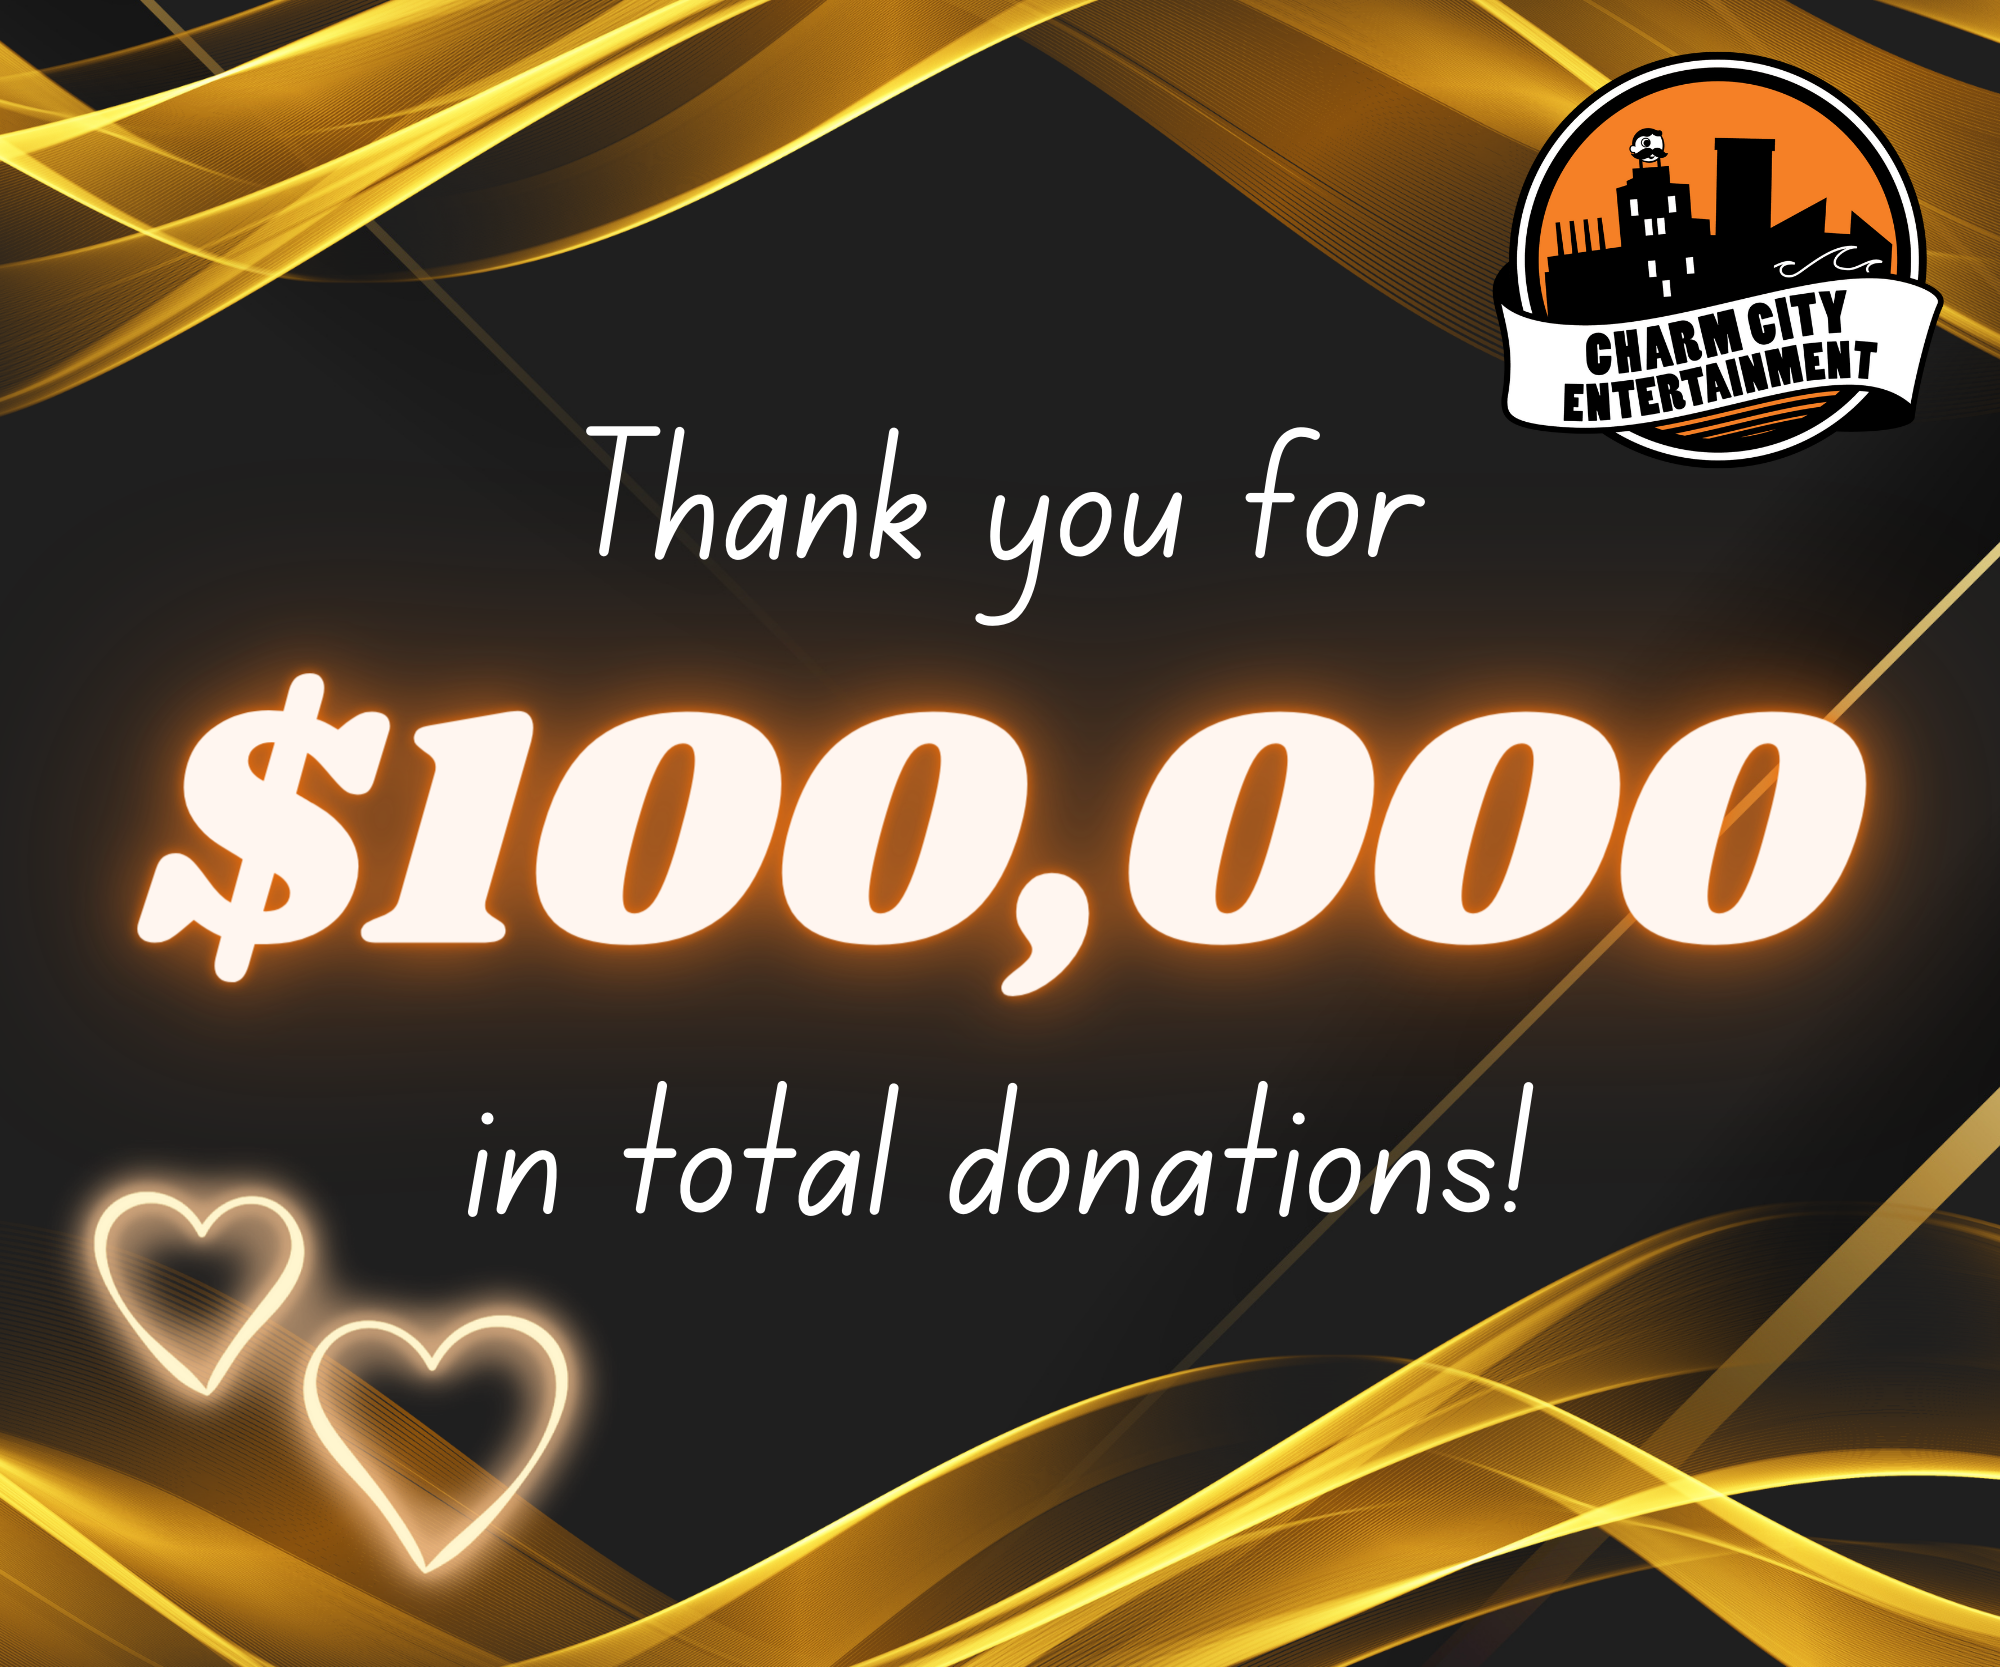 a black background with gold details, the Charm City Entertainment logo, orange neon hearts, and white and orange neon text. The text reads: Thank you for $100,000 in total donations!